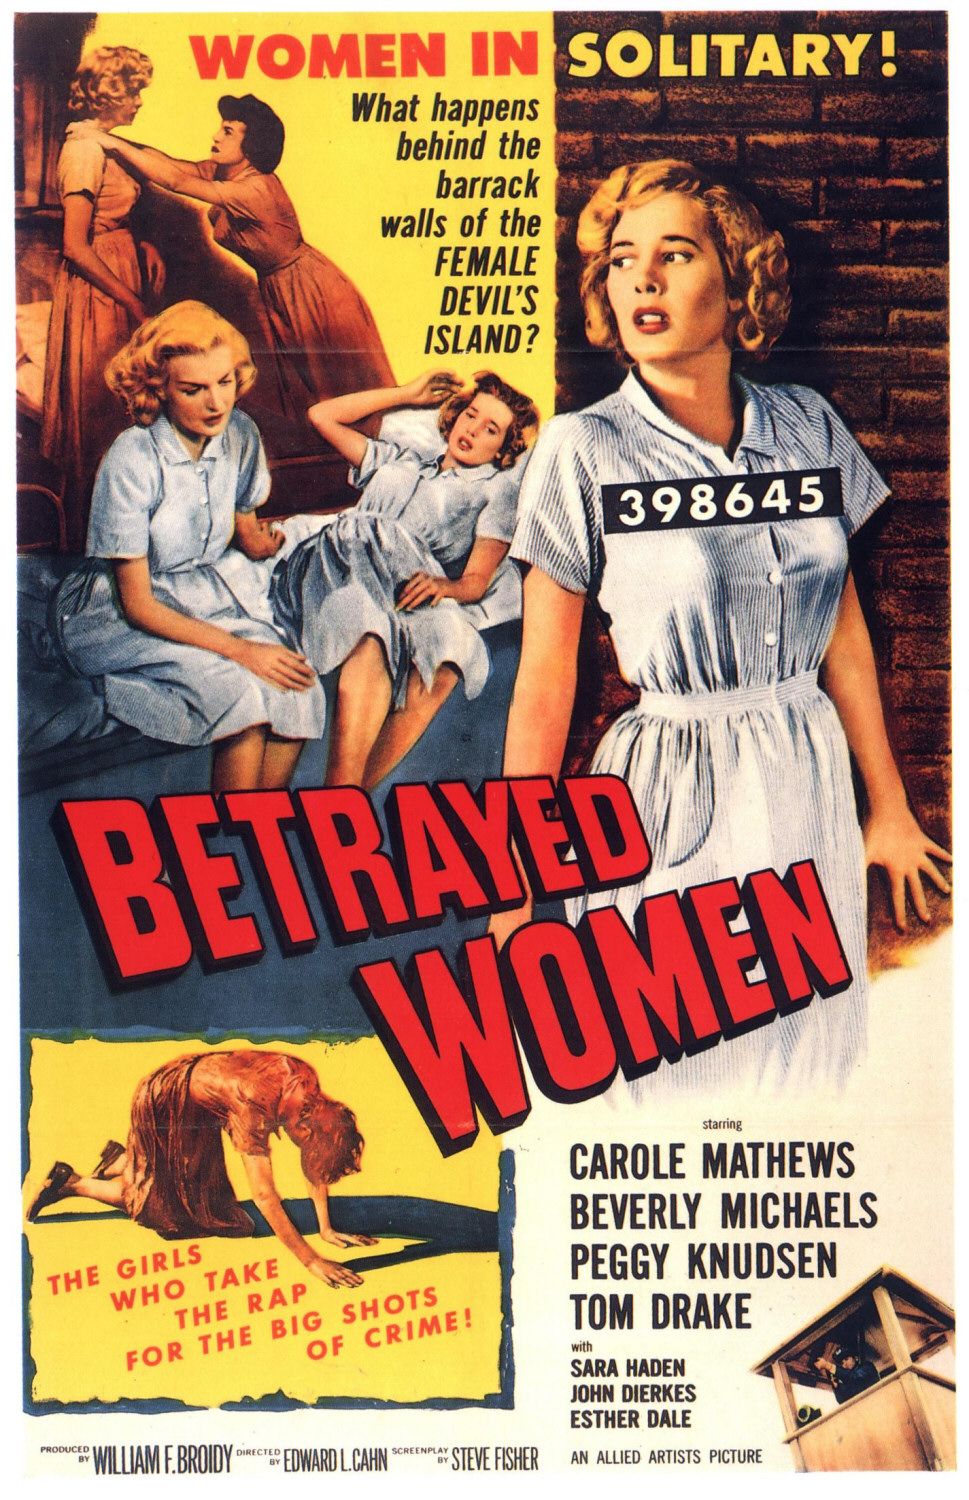 Extra Large Movie Poster Image for Betrayed Women (#1 of 2)